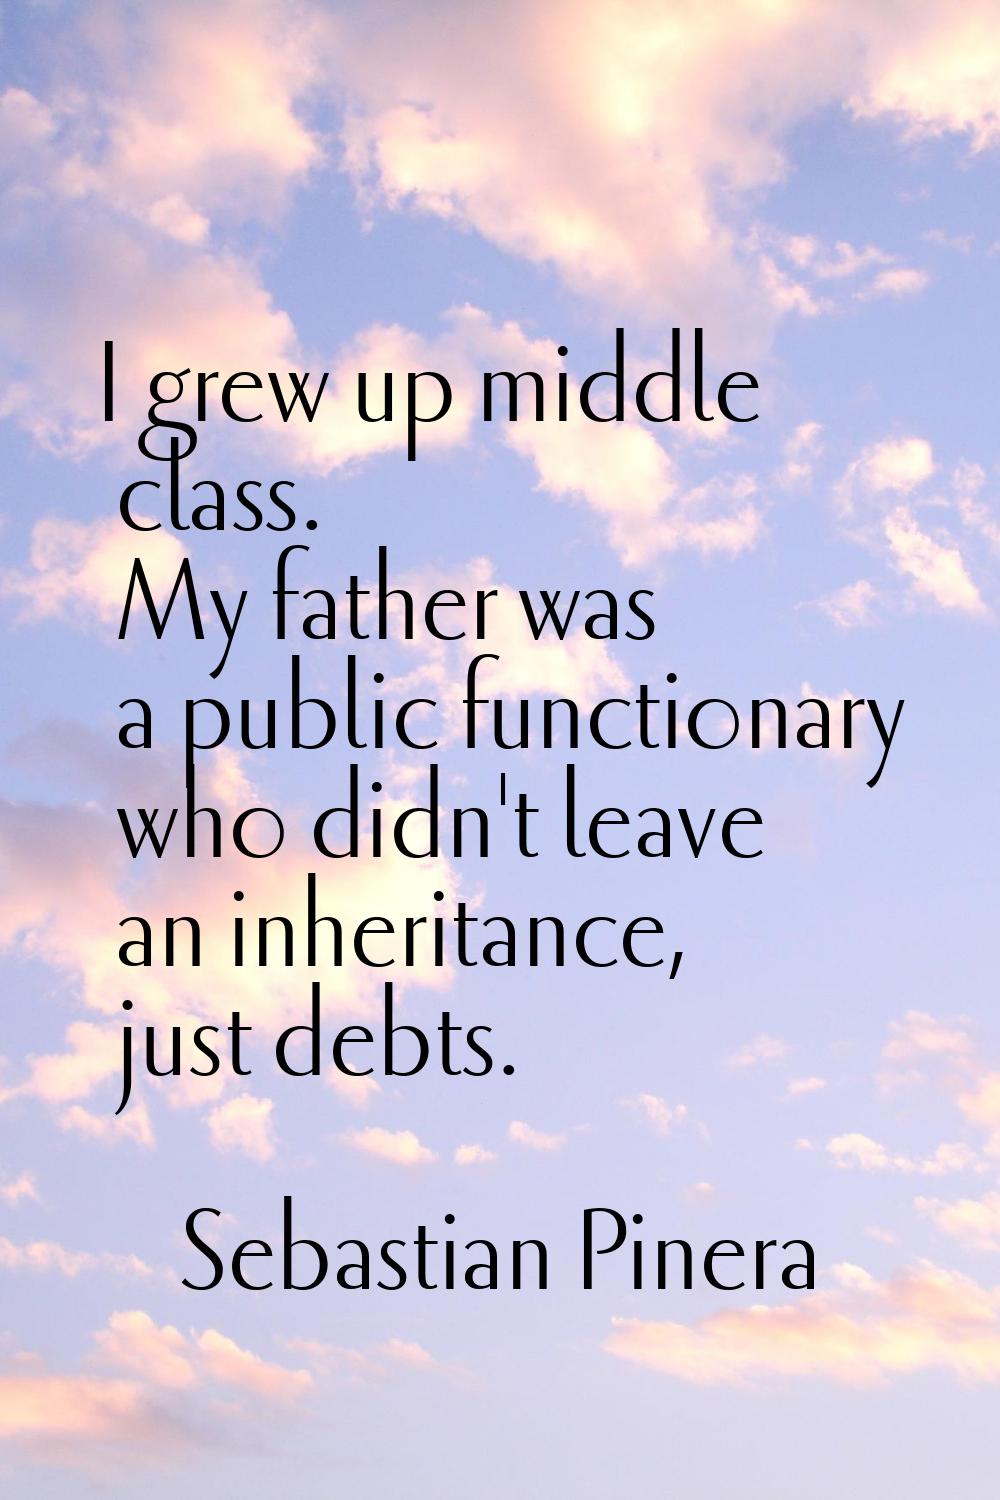 I grew up middle class. My father was a public functionary who didn't leave an inheritance, just de